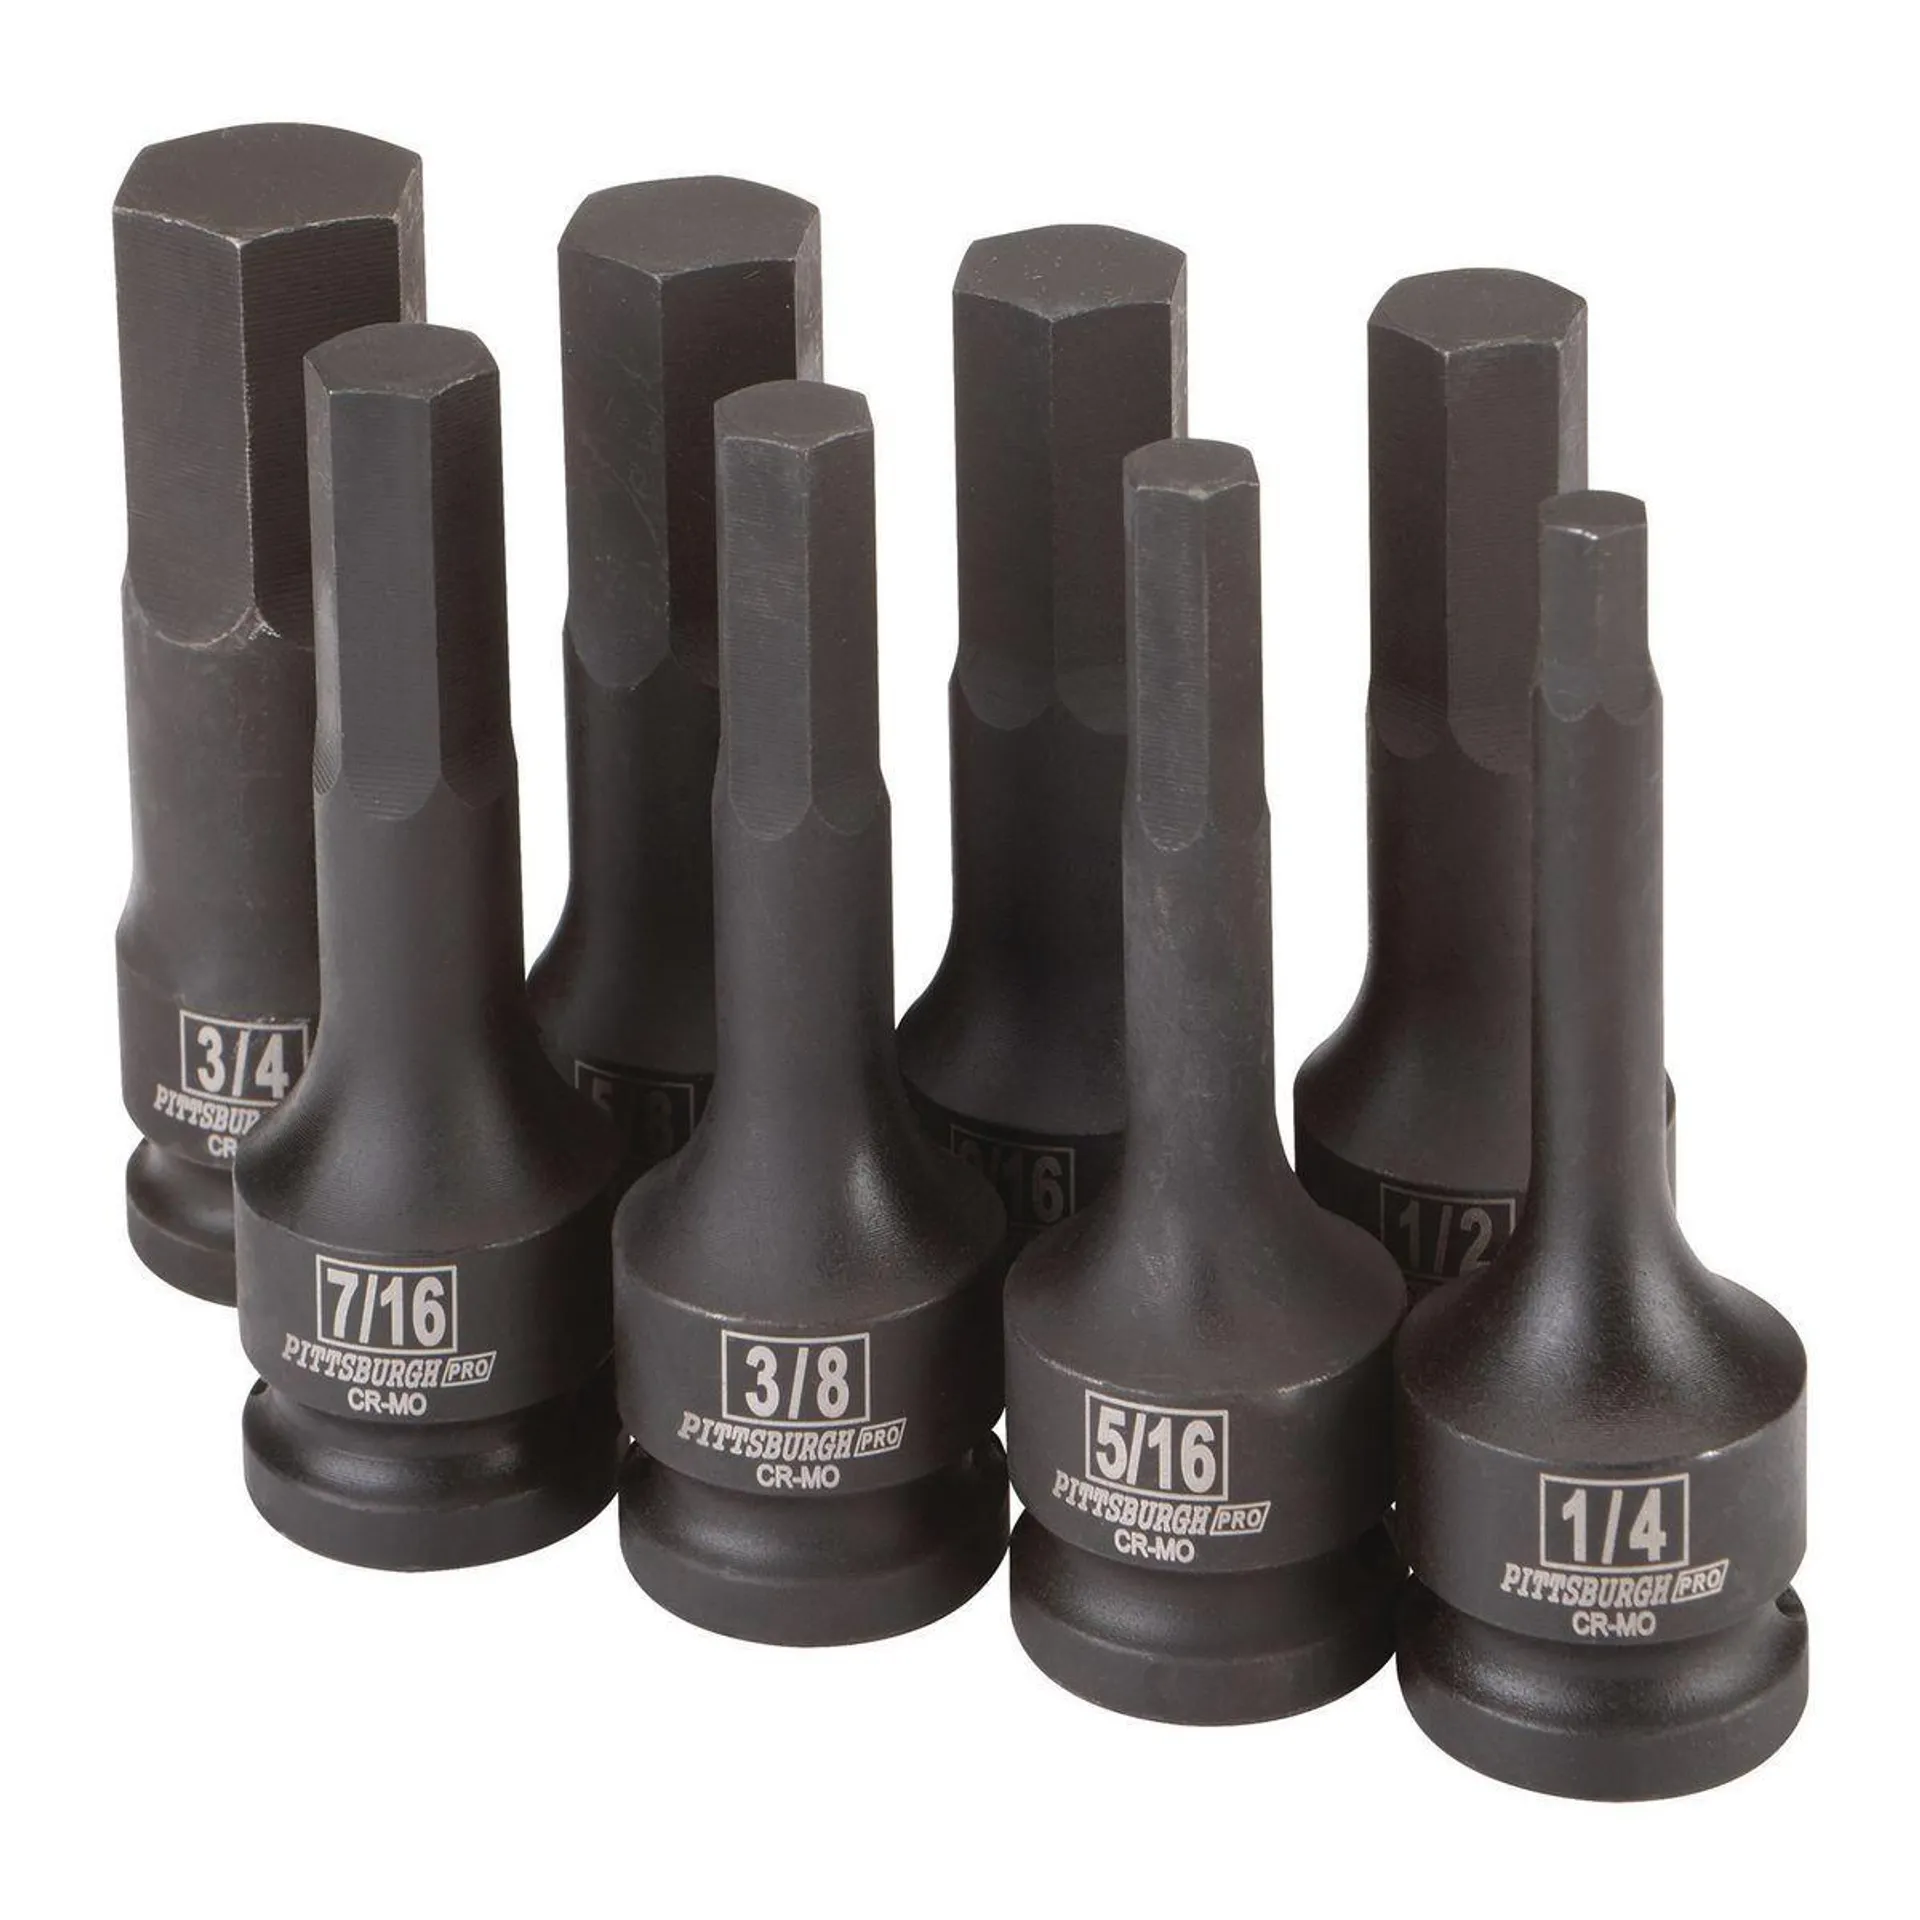 1/2 in. Drive SAE Impact Hex Socket Set, 8 Piece